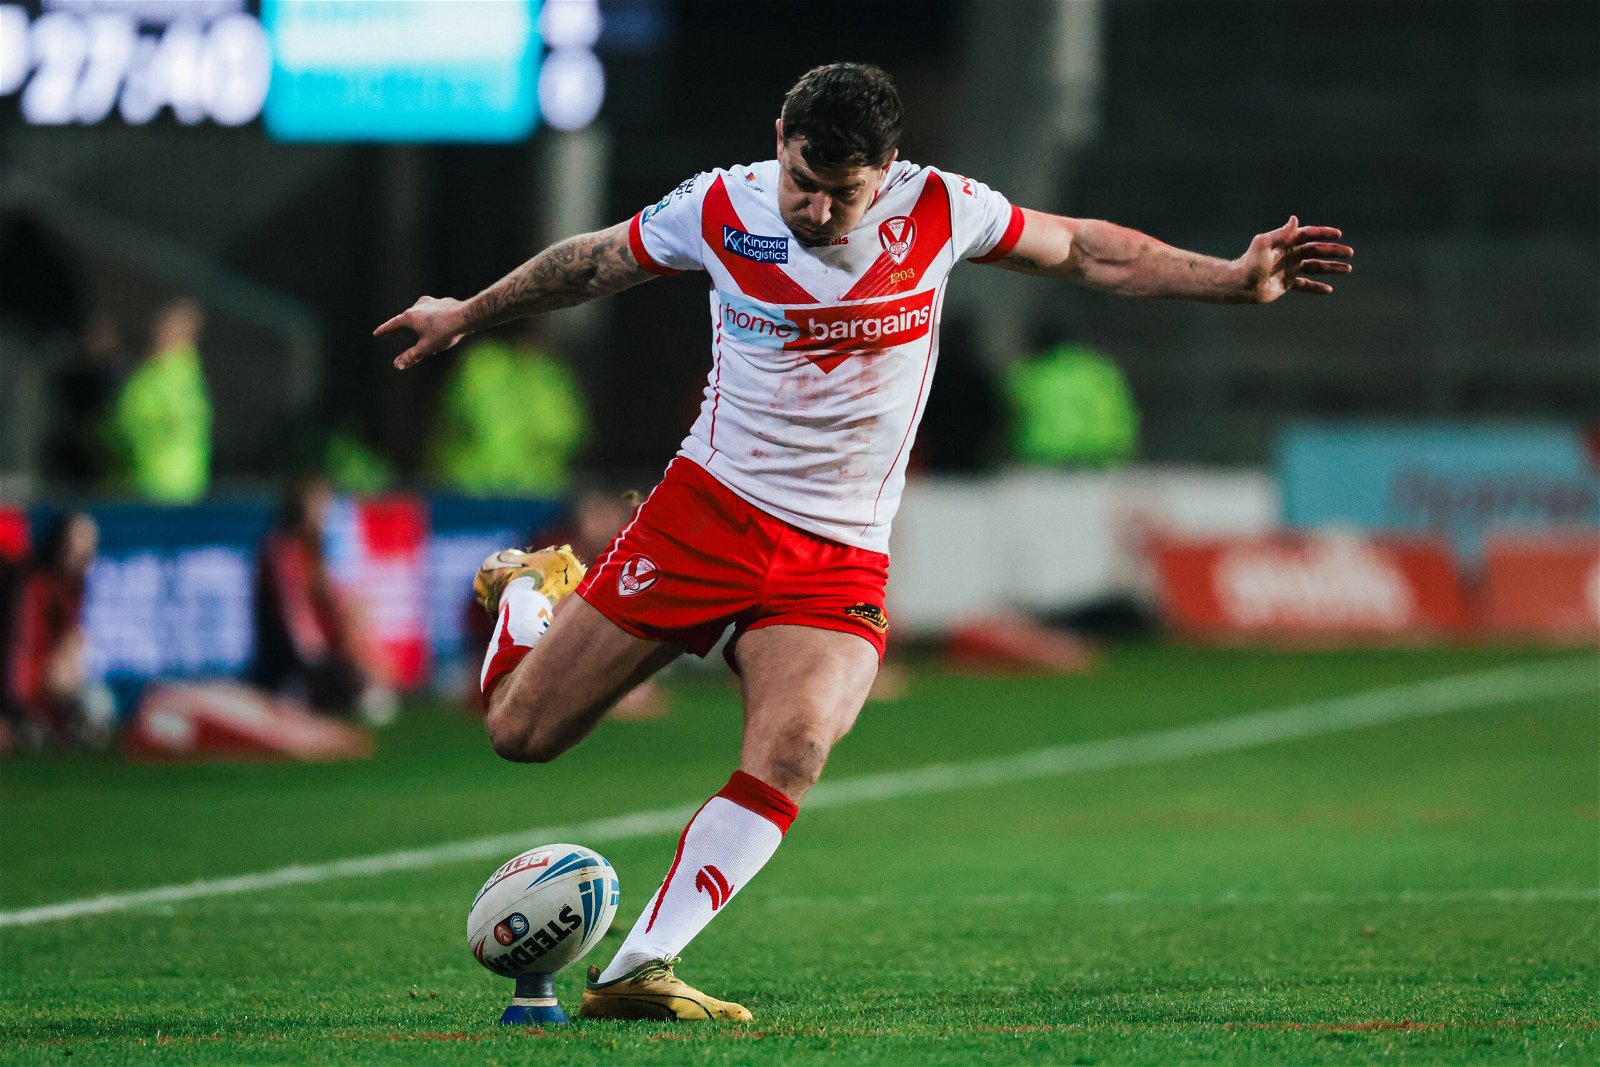 Mark Percival is wearing the St Helens shirt, kicking for goal. Of course, it's white with a red V, and there's a thin red line down the sides. The collar and sleeve cuffs are red. The Home Bargains logo on it is huge.